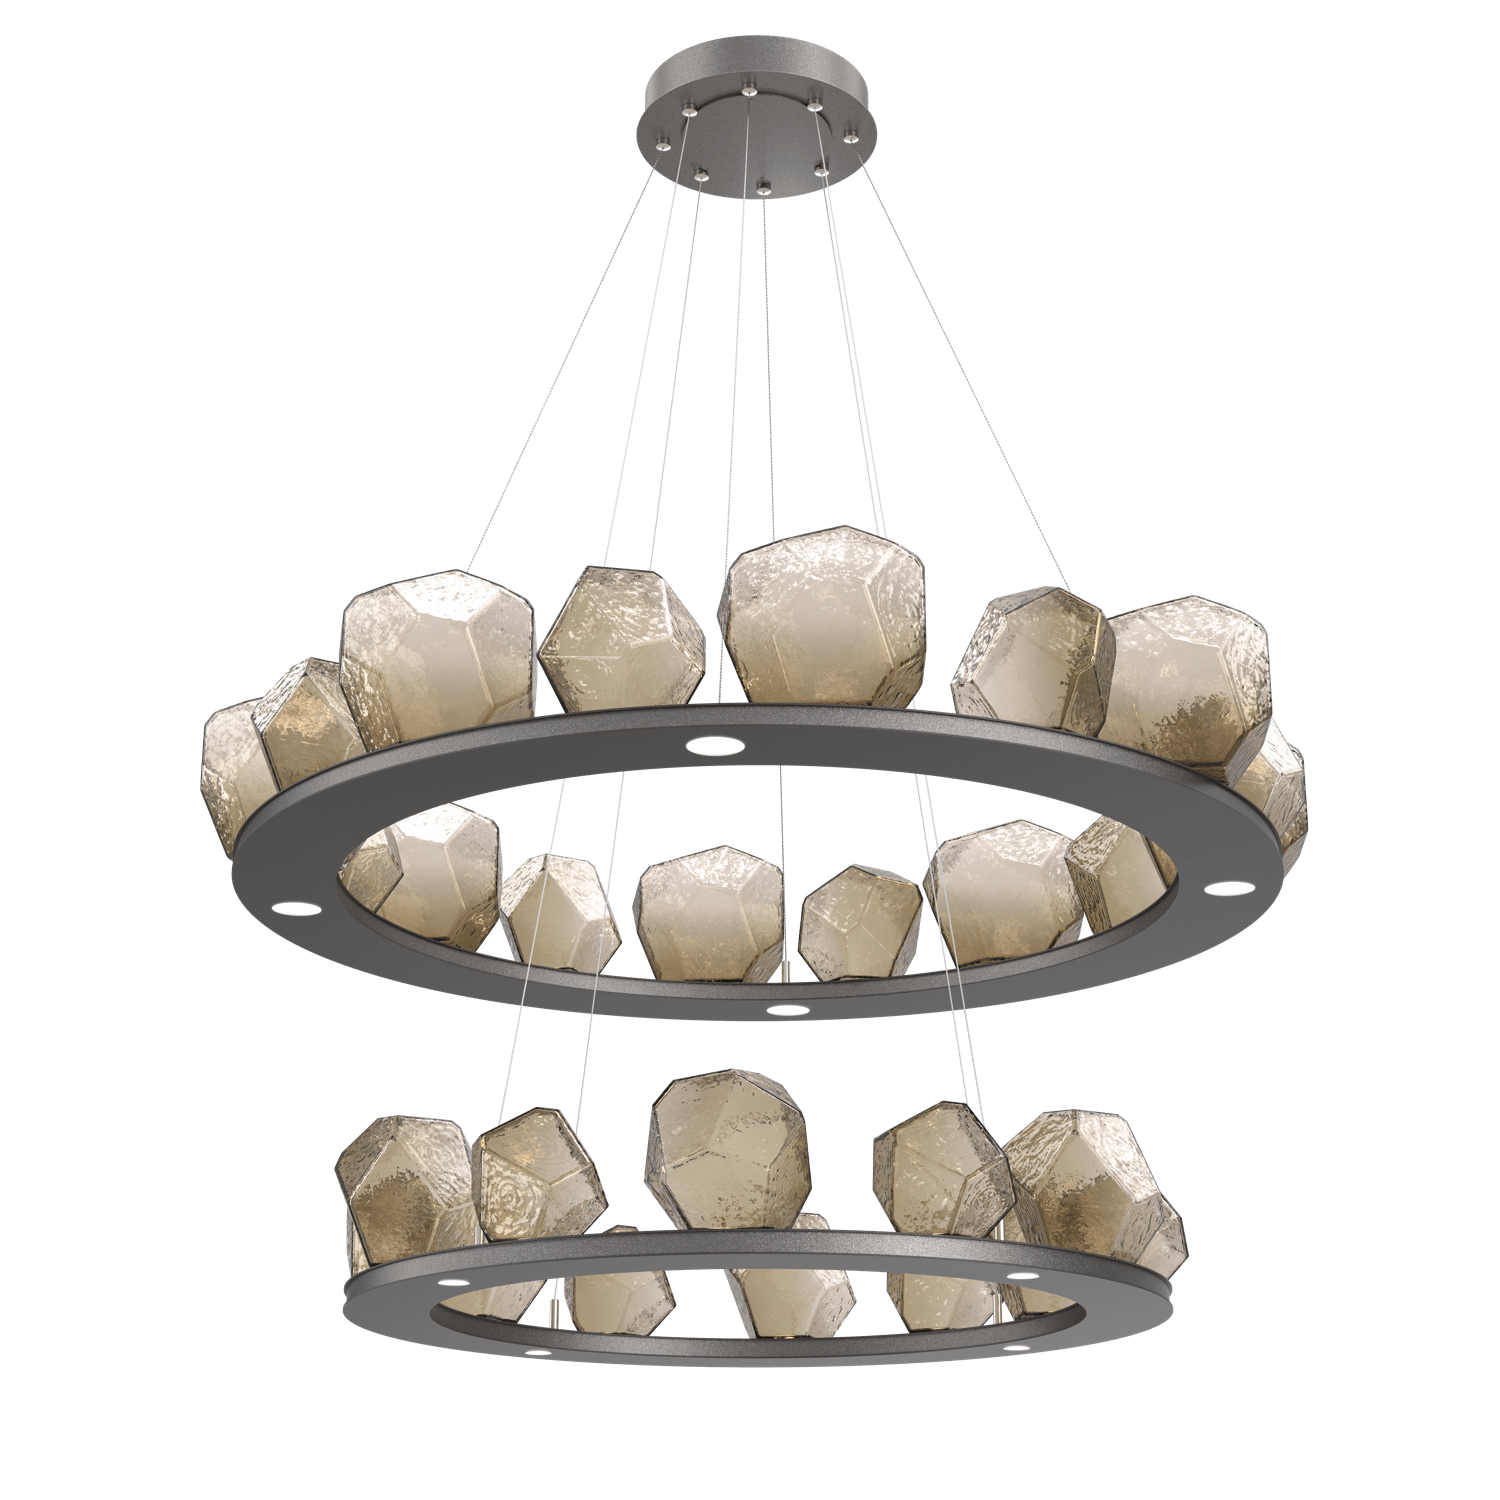 CHB0039-2B-GP-B-Hammerton-Studio-Gem-48-inch-two-tier-ring-chandelier-with-graphite-finish-and-bronze-blown-glass-shades-and-LED-lamping